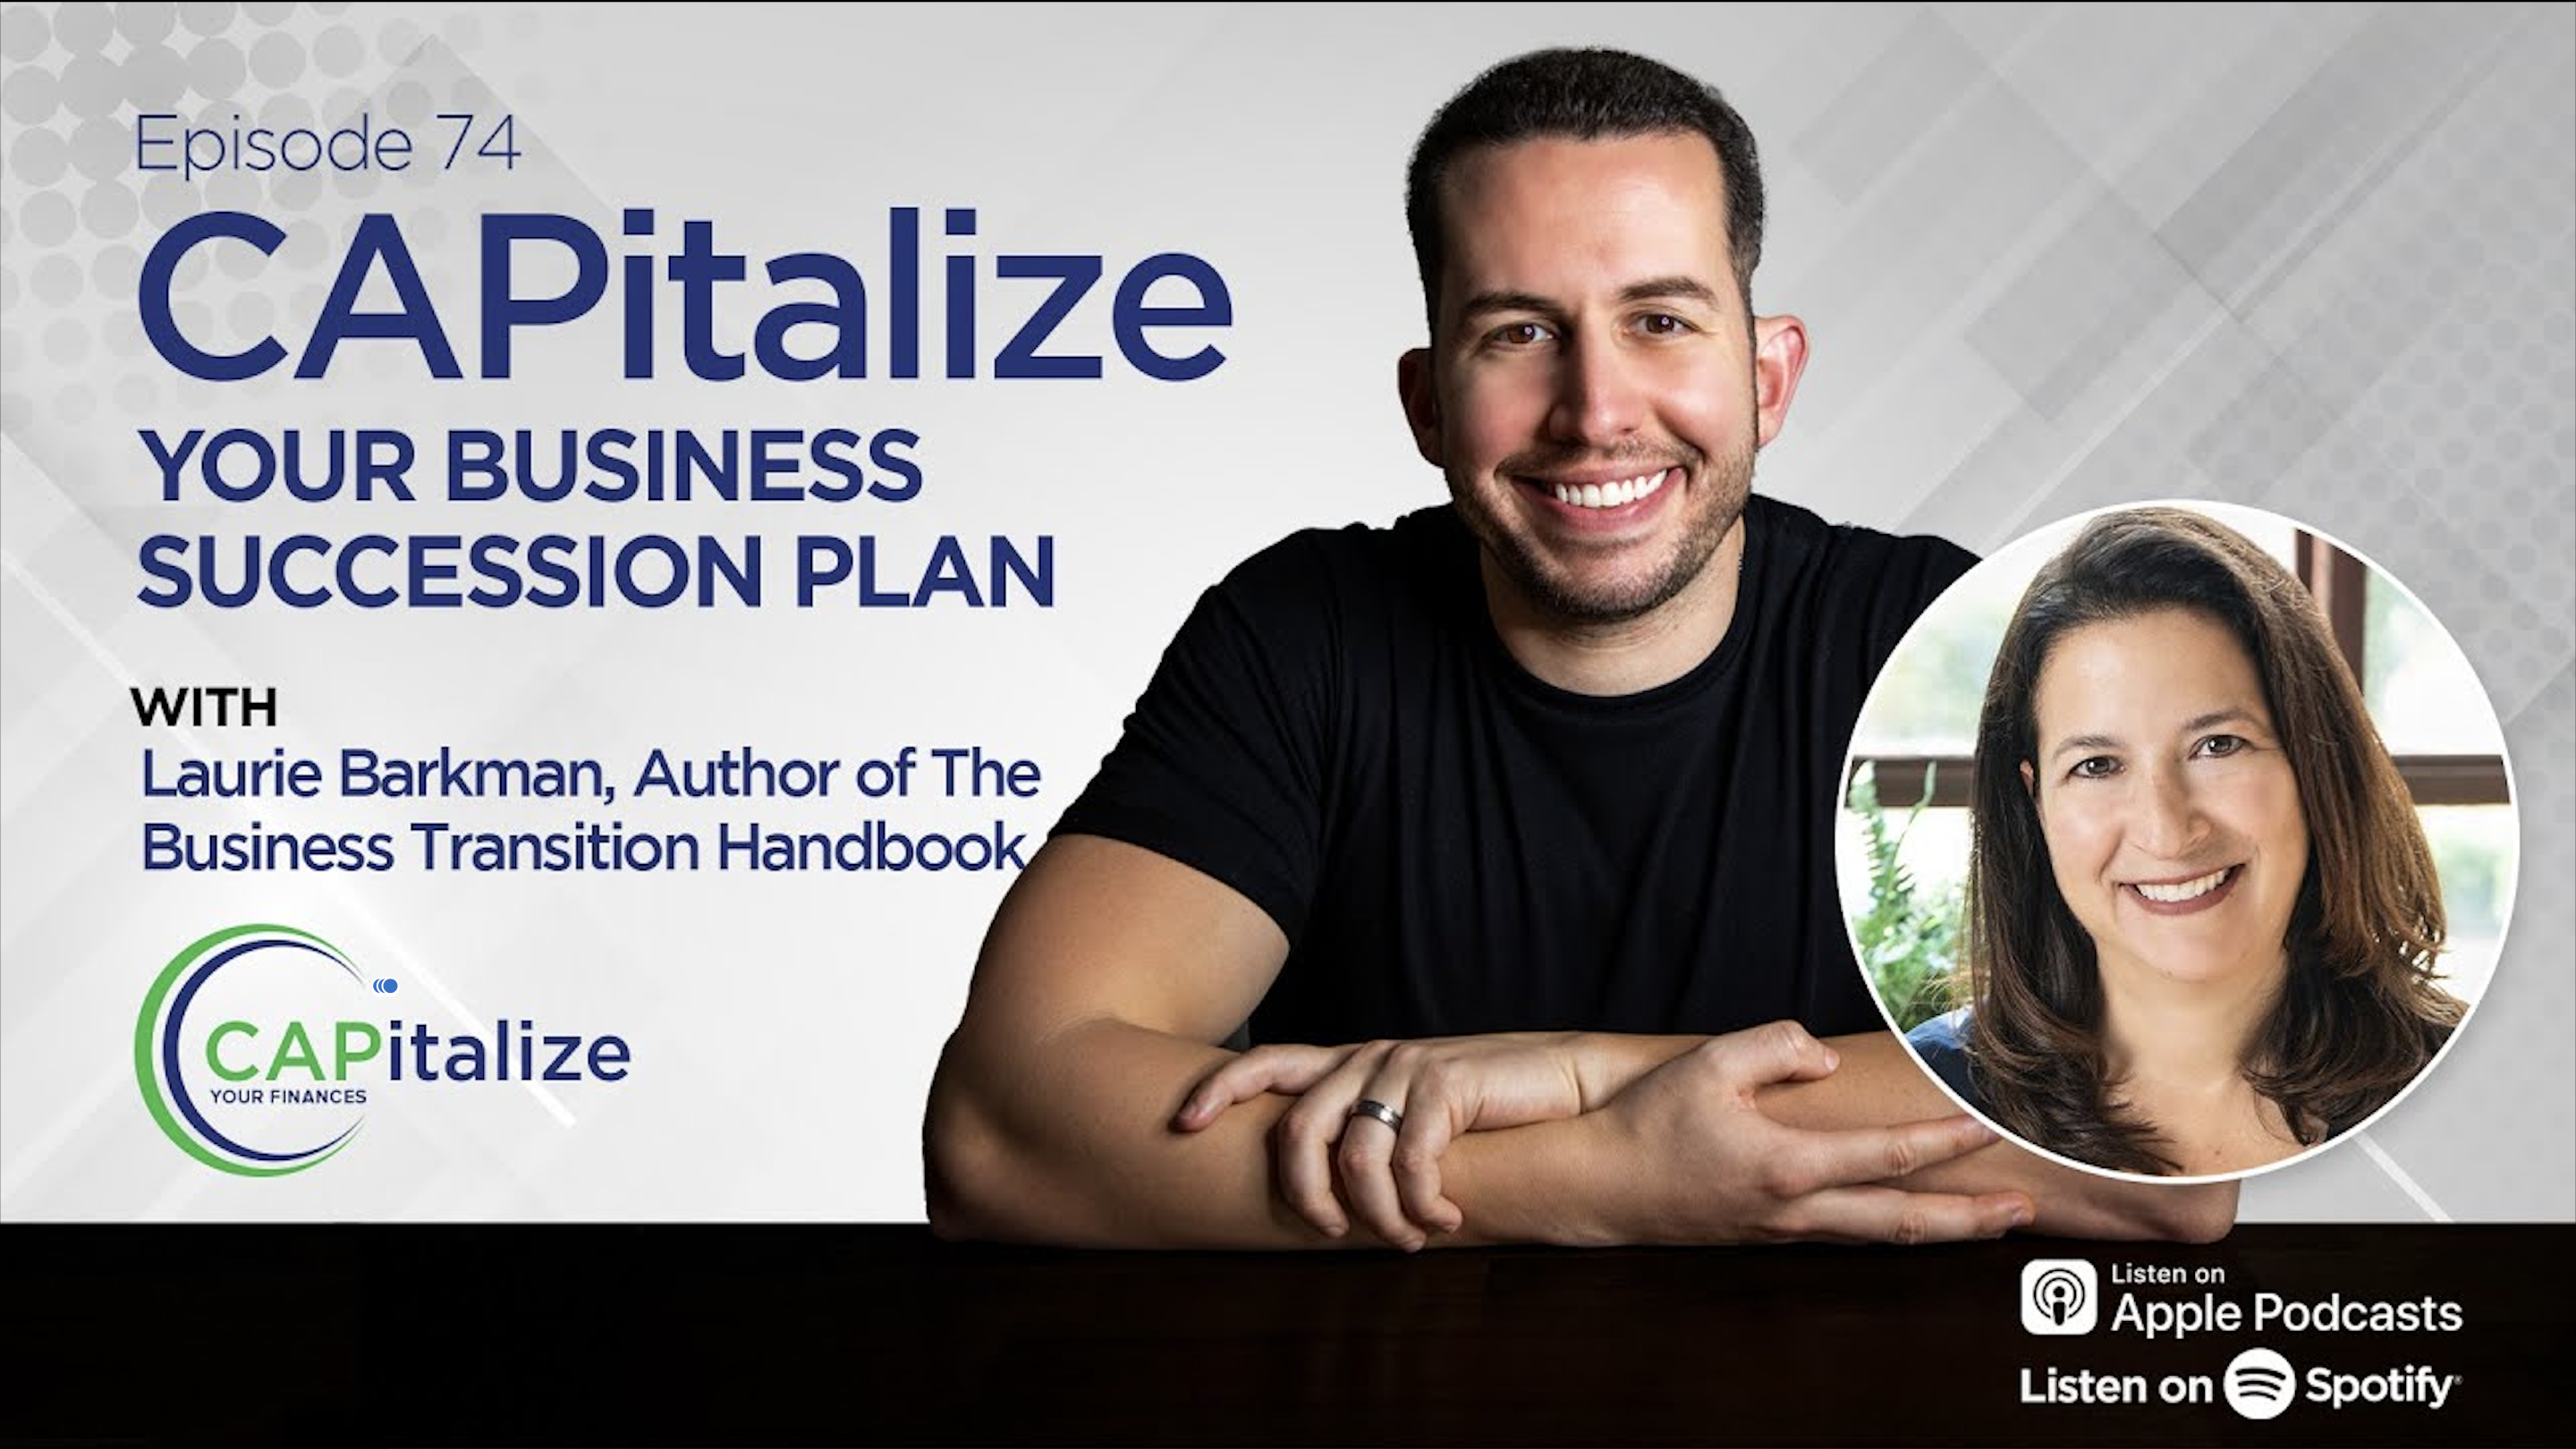 CAPitalize Your Business Succession Plan with Laurie Barkman